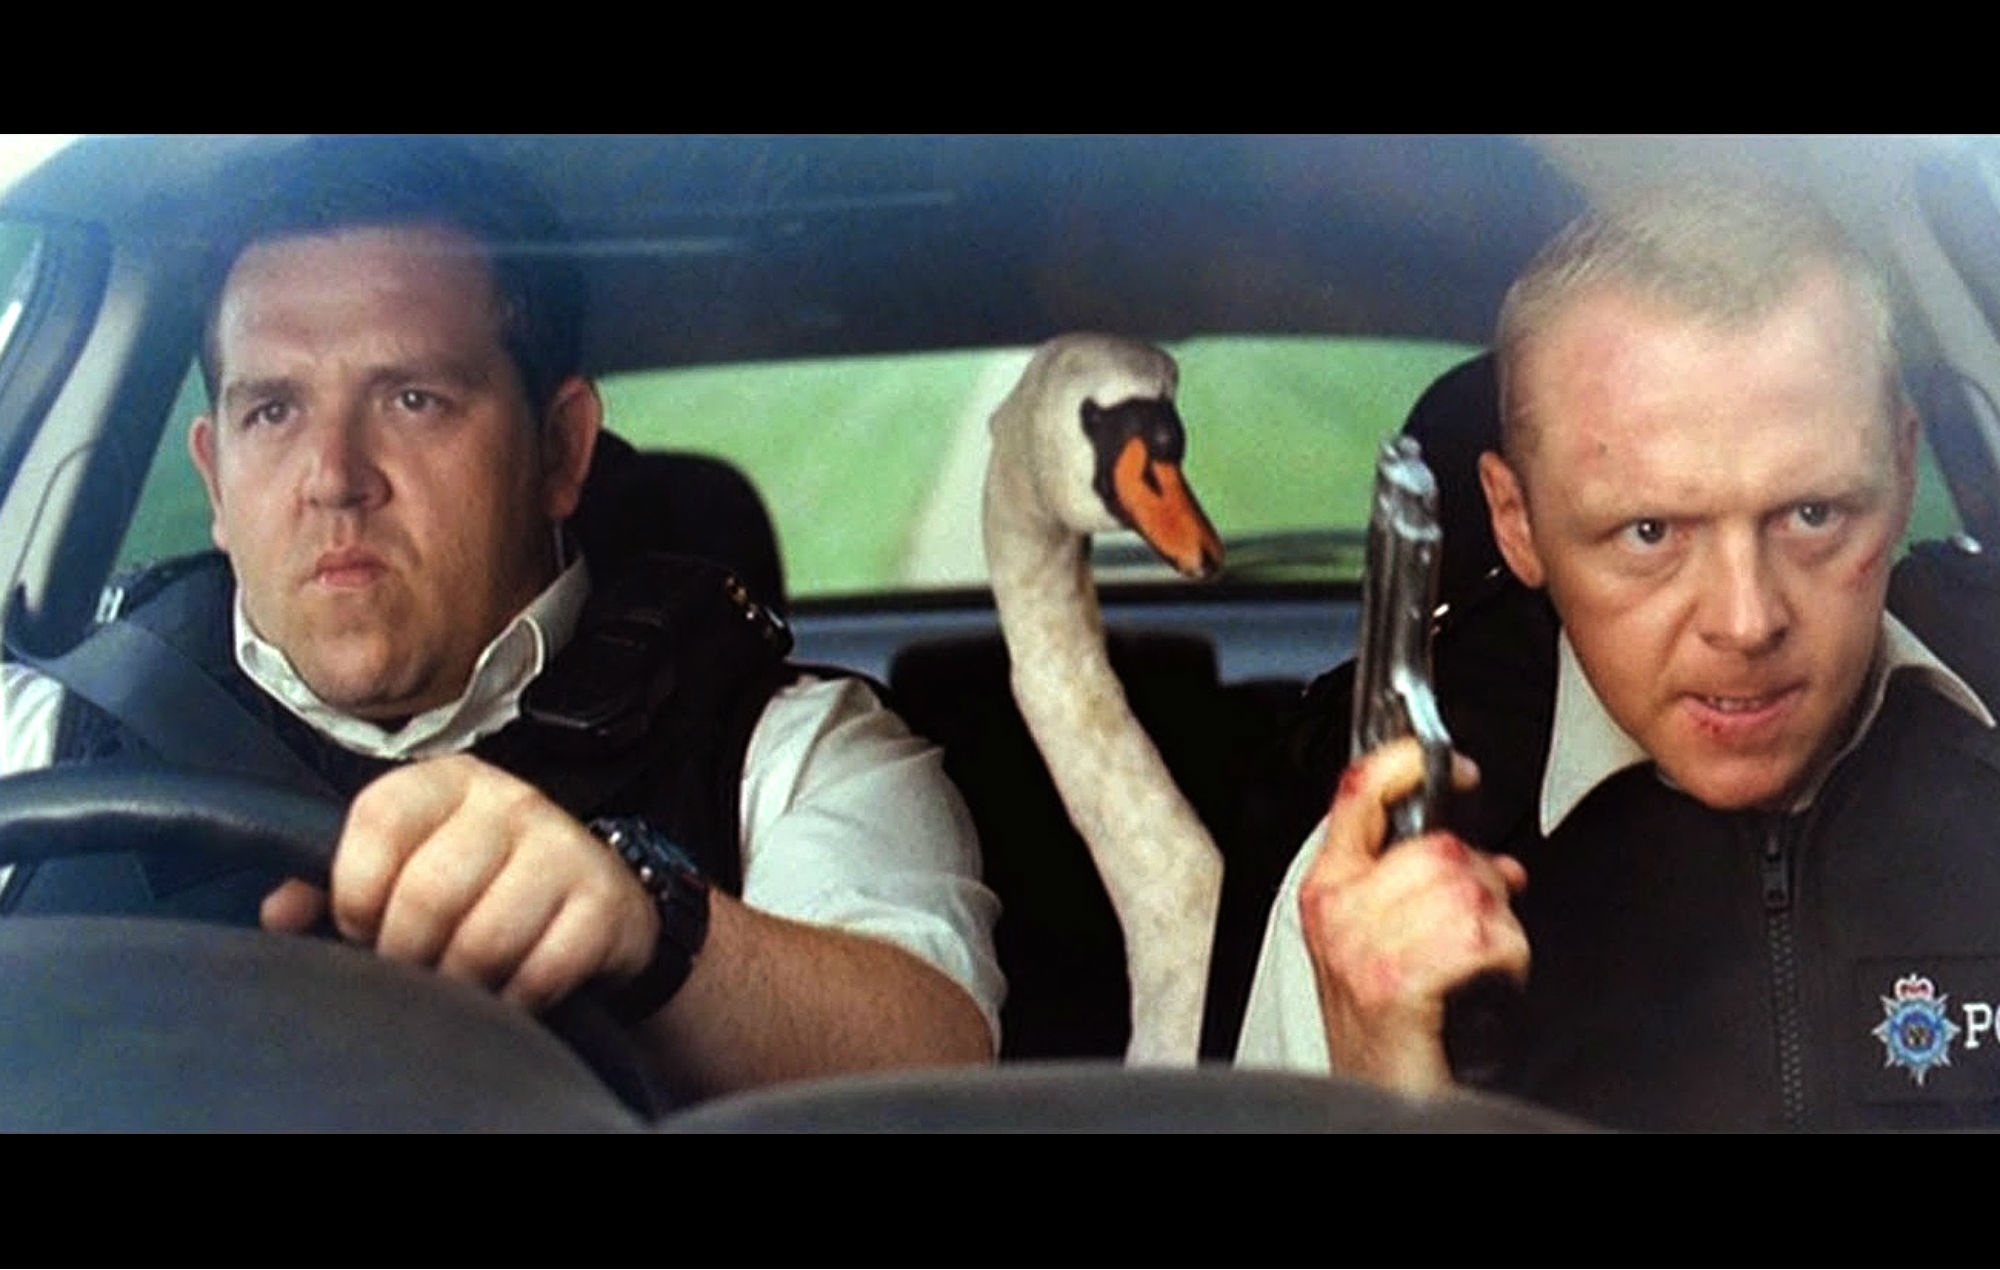 Nicholas (right) and Danny (left) sit in the front seats of a car, with a swan in the back seat.